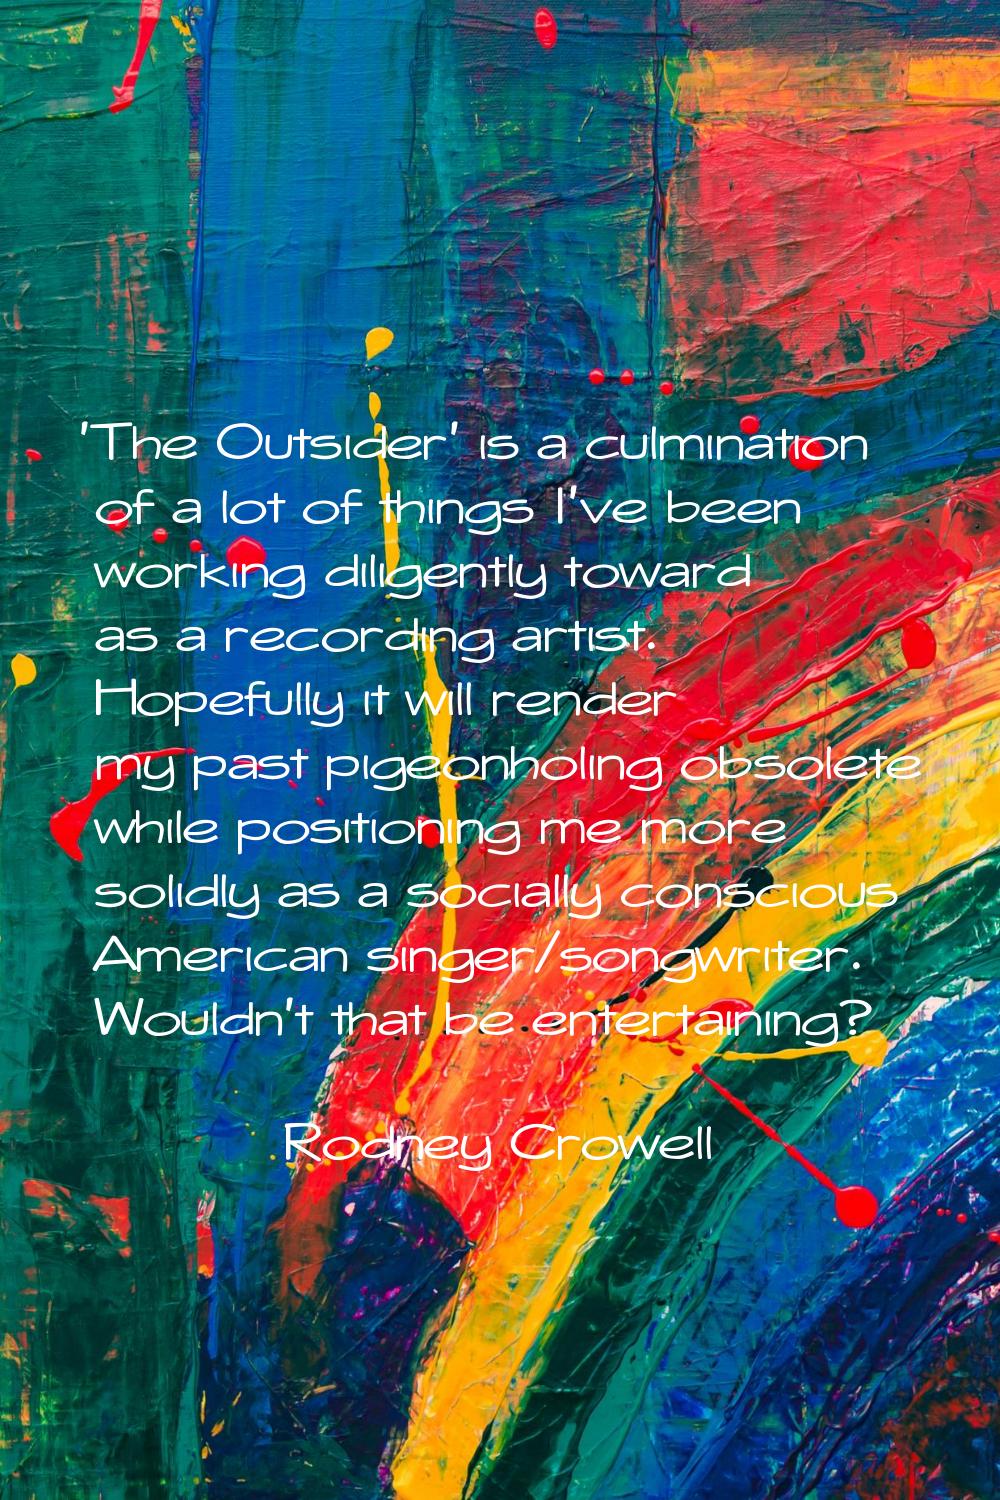 'The Outsider' is a culmination of a lot of things I've been working diligently toward as a recordi